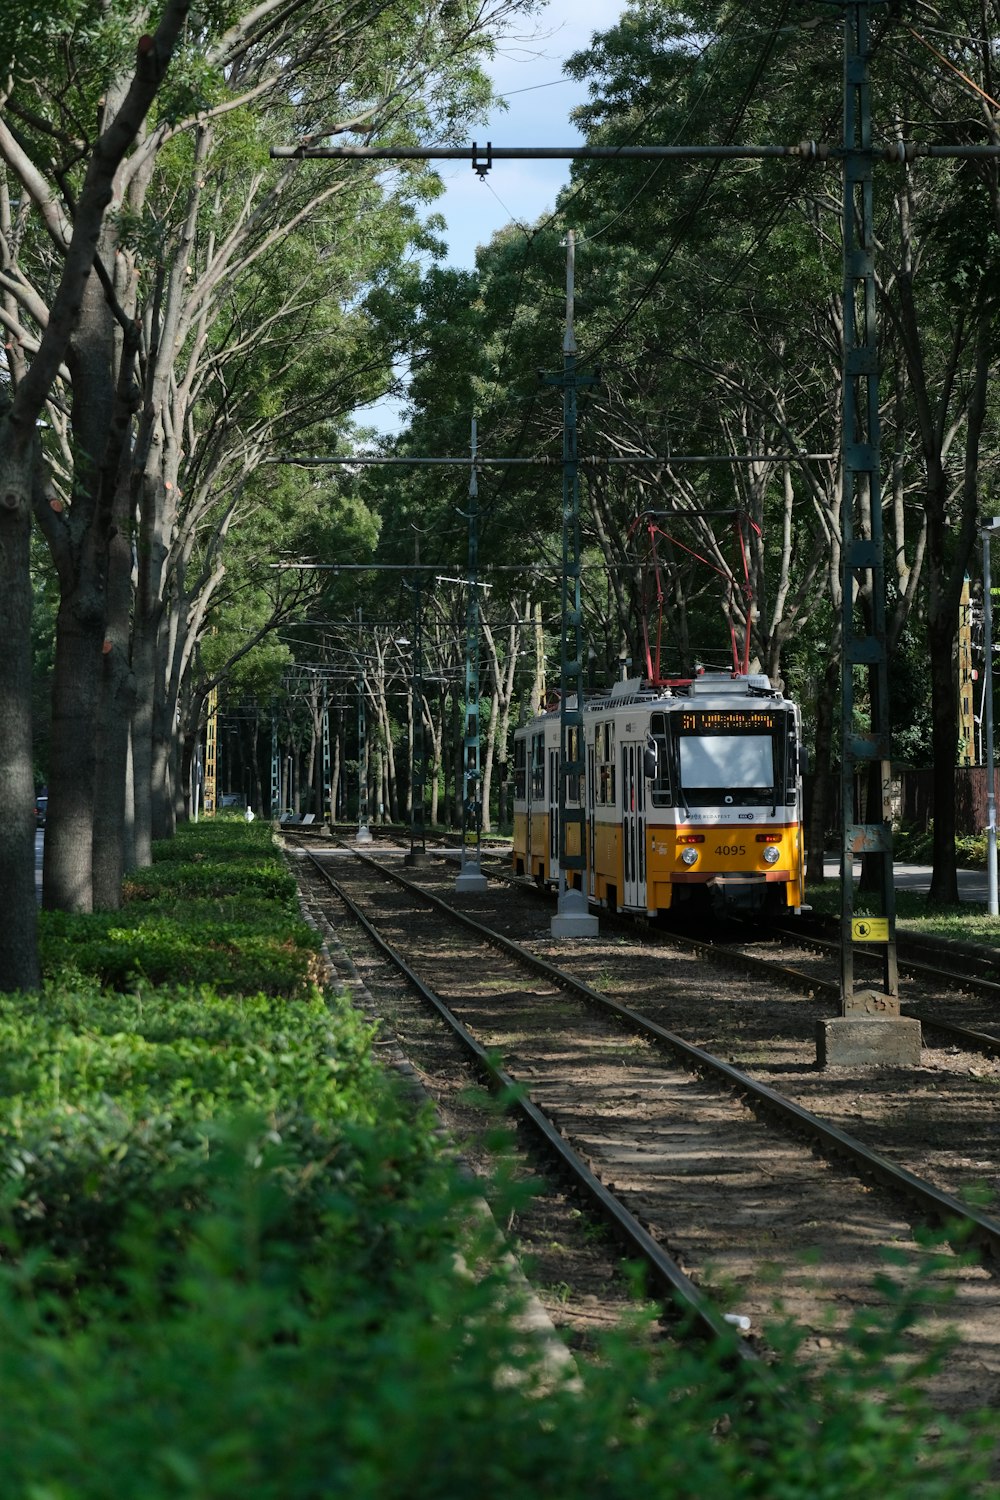 yellow and red train on rail tracks surrounded by green trees during daytime